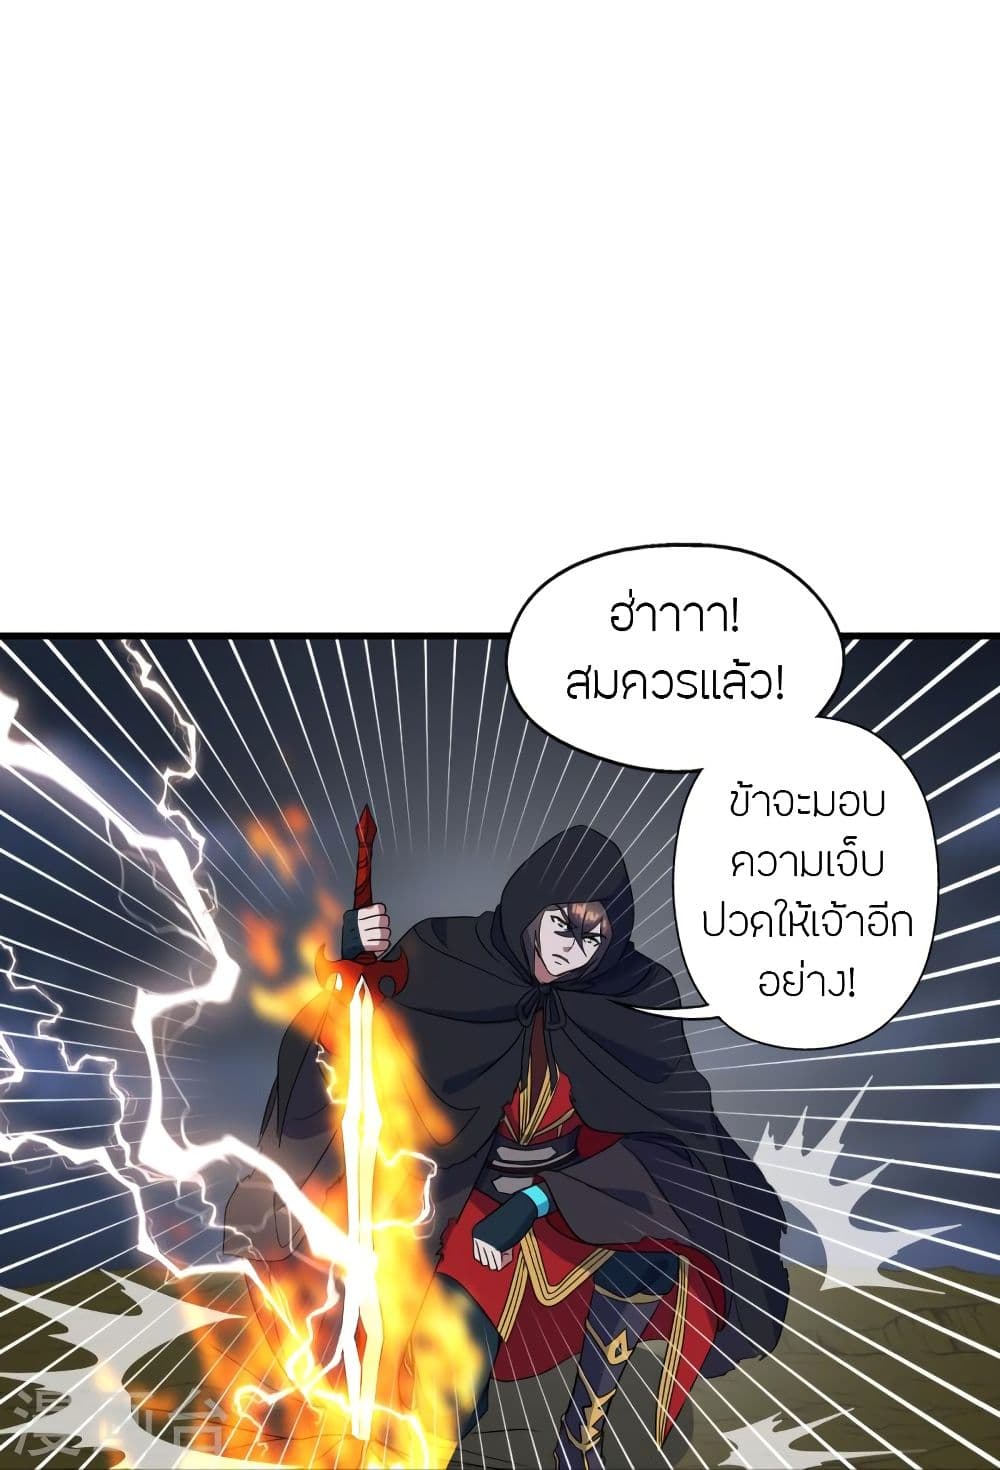 Banished Disciple's Counterattack เธเธฑเธเธฃเธเธฃเธฃเธ”เธดเน€เธเธตเธขเธเธขเธธเธ—เธ 304 (60)